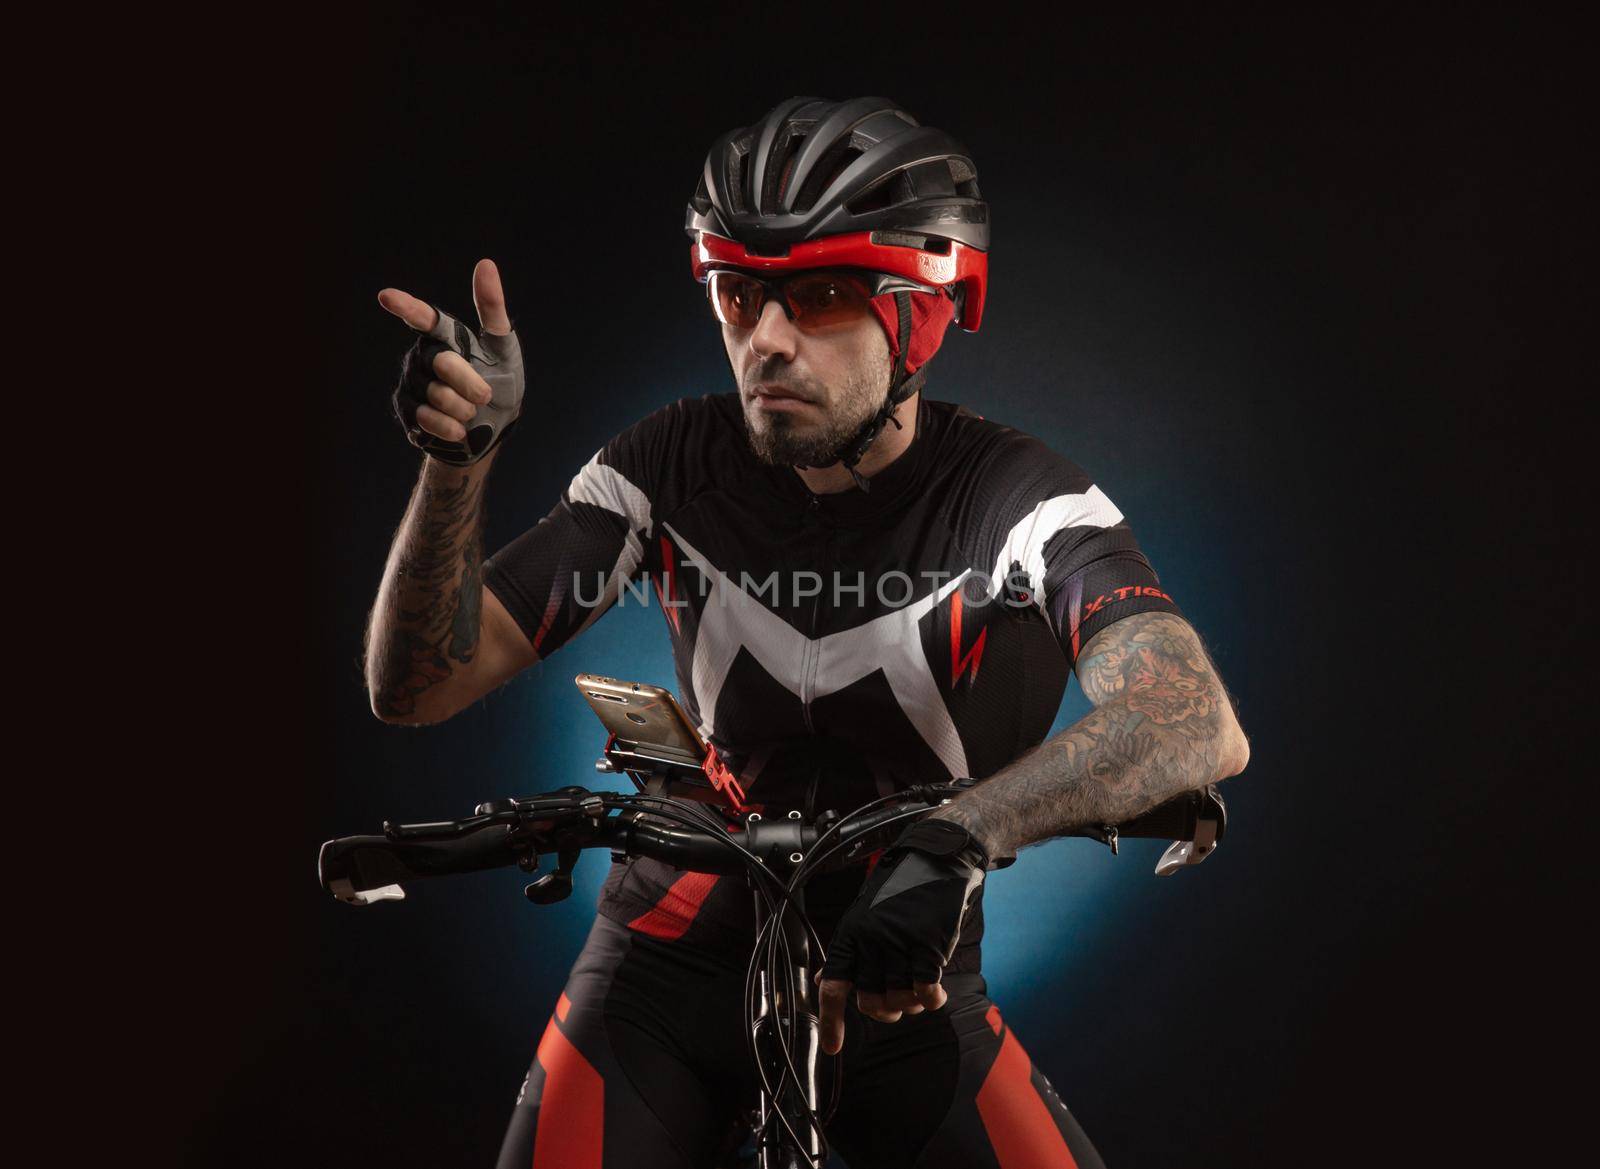 guy cyclist in a Bicycle helmet looks at the phone Navigator